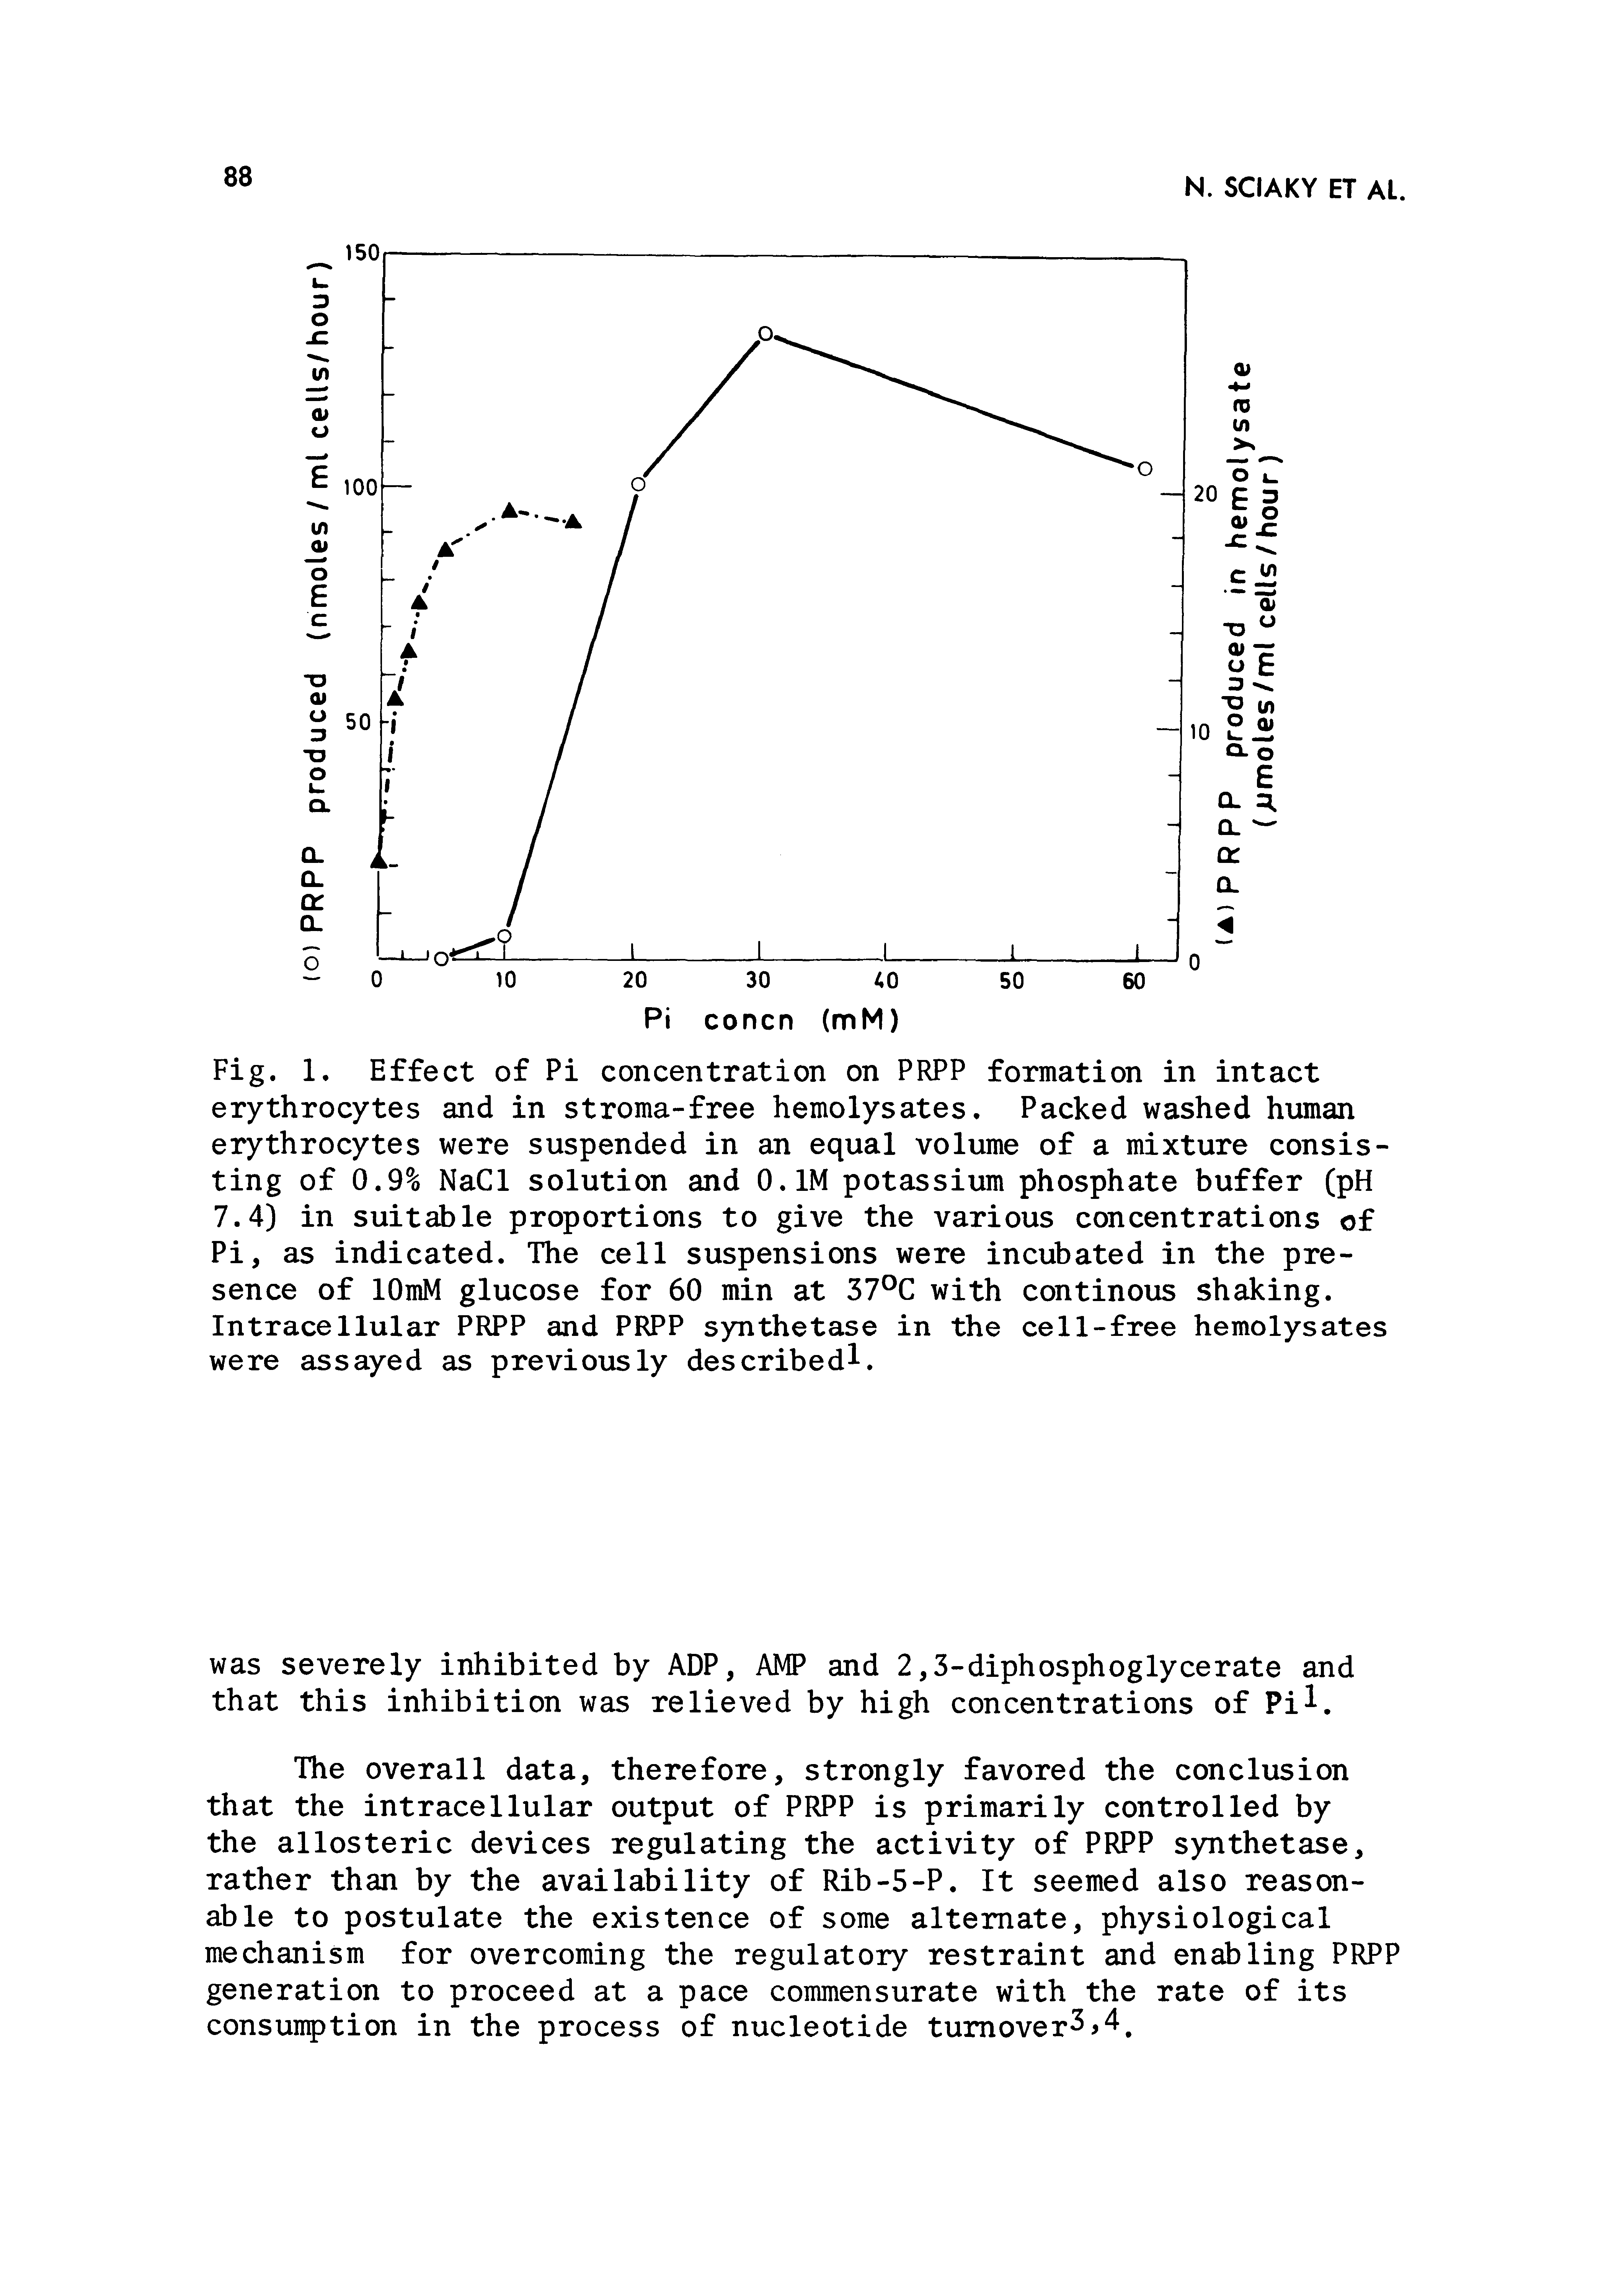 Fig. 1, Effect of Pi concentration on PRPP formation in intact erythrocytes and in stroma-free hemolysates. Packed washed human erythrocytes were suspended in an equal volume of a mixture consisting of 0.9% NaCl solution and O.IM potassium phosphate buffer (pH 7.4) in suitable proportions to give the various concentrations of Pi, as indicated. The cell suspensions were incubated in the presence of lOmM glucose for 60 min at 37°C with continous shaking. Intracellular PRPP and PRPP synthetase in the cell-free hemolysates were assayed as previously describedl.